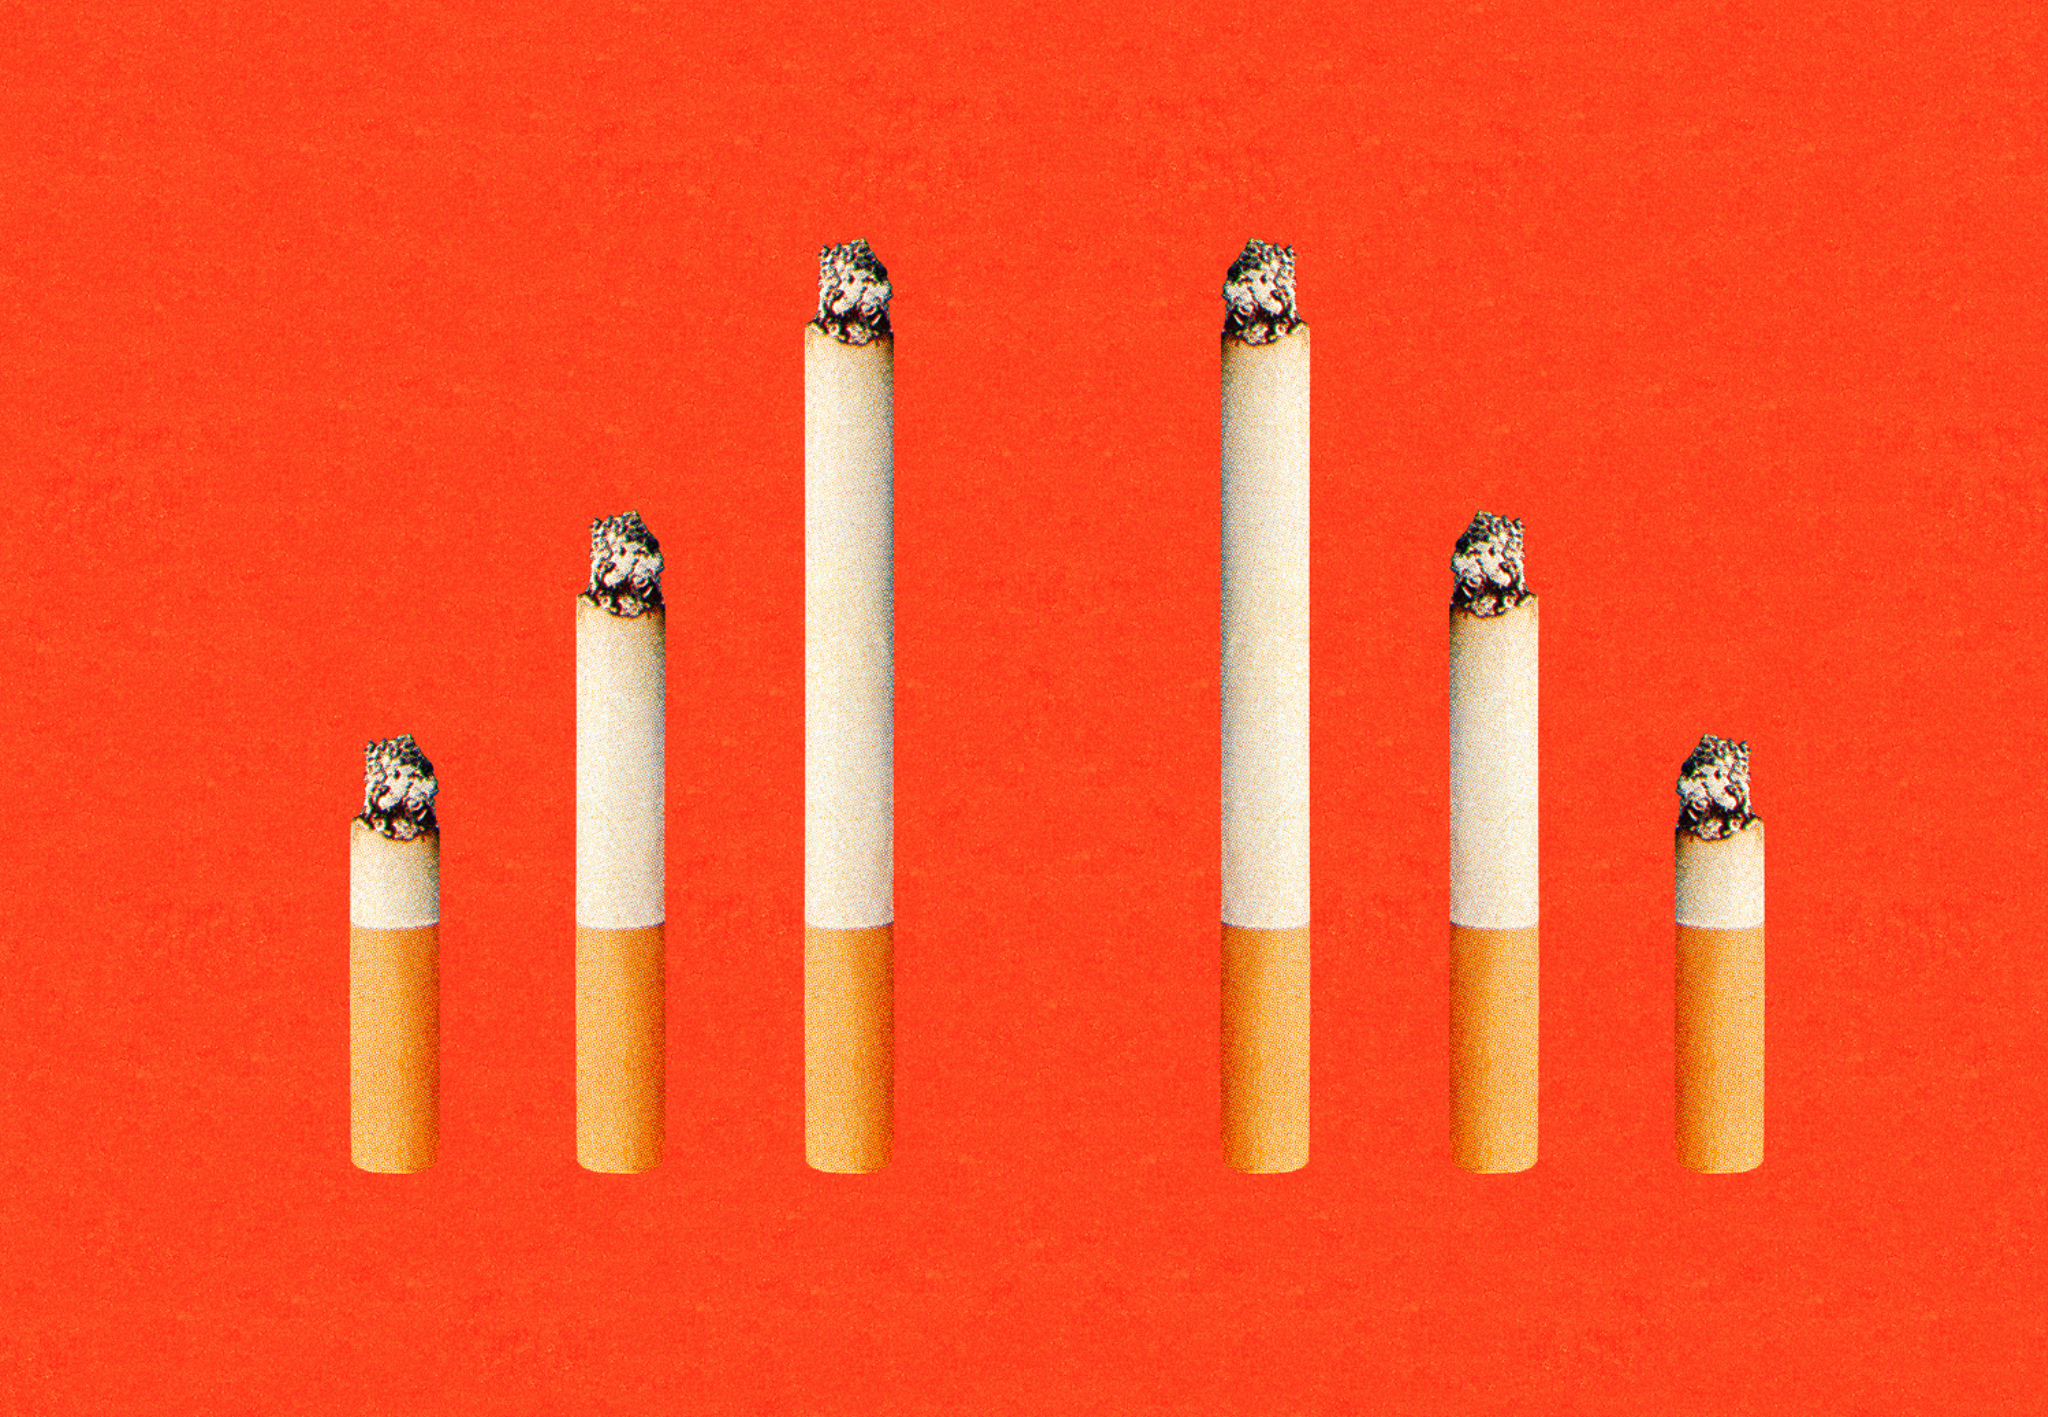 The cost of smoking